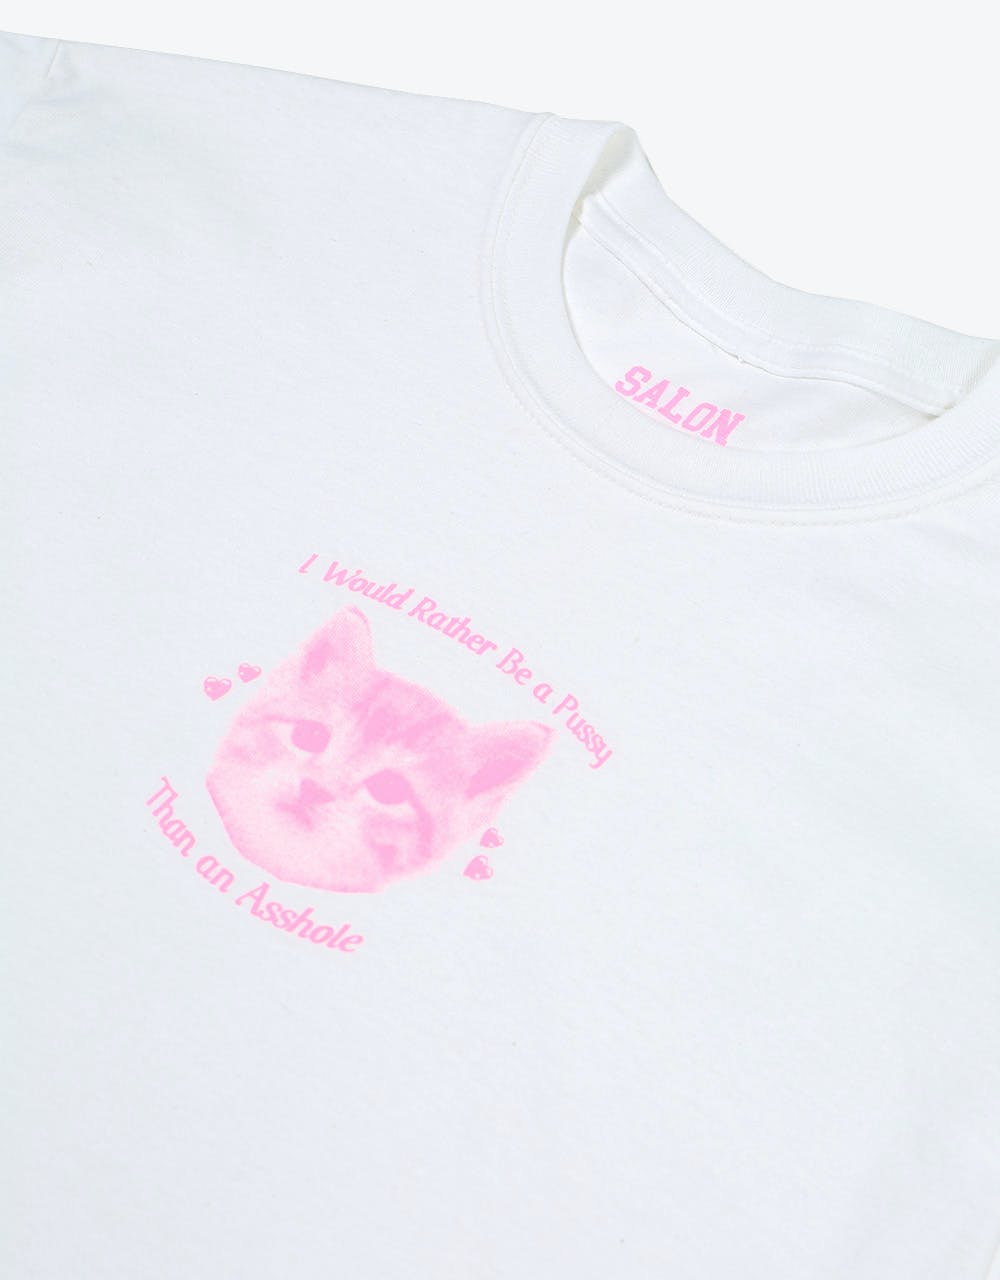 Salon Skateboards Rather be a Pussy T-Shirt - White